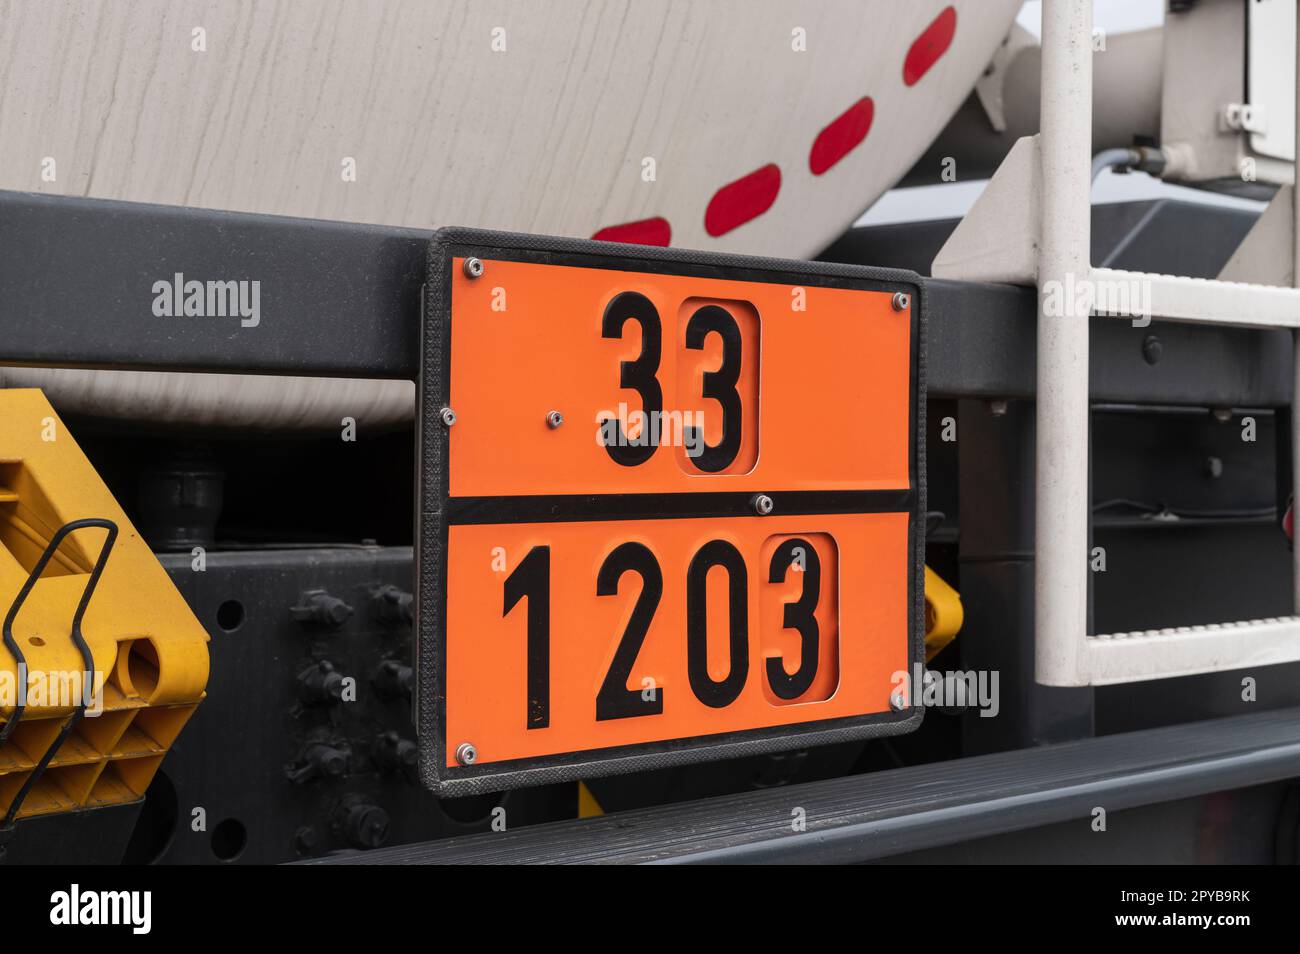 Dangerous goods sign for gasoline or petrol on a tank truck Stock Photo